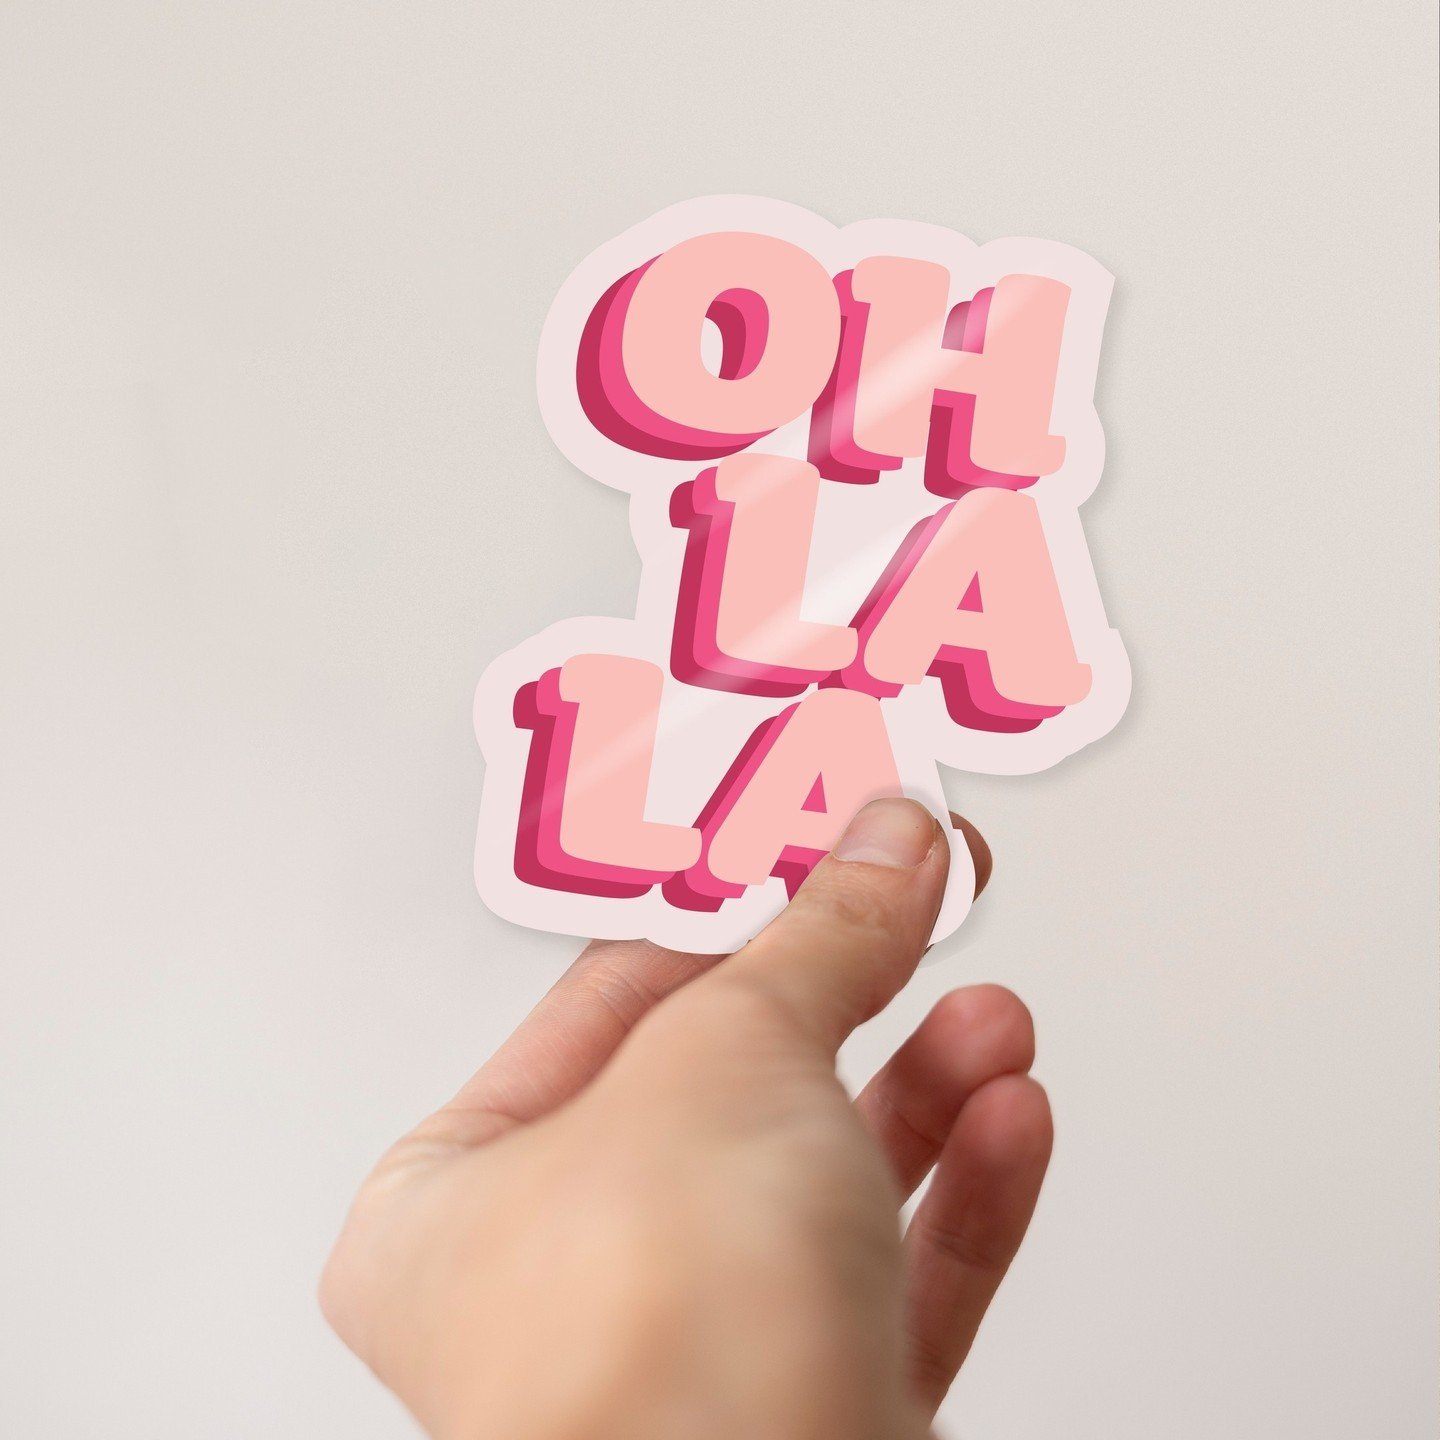 Design assets as simple as stickers can make a long lasting impression! Are you looking for fun and creative ways to share your business? I can create custom designs that align with your business and ideal customers for you to print and sell or hand 